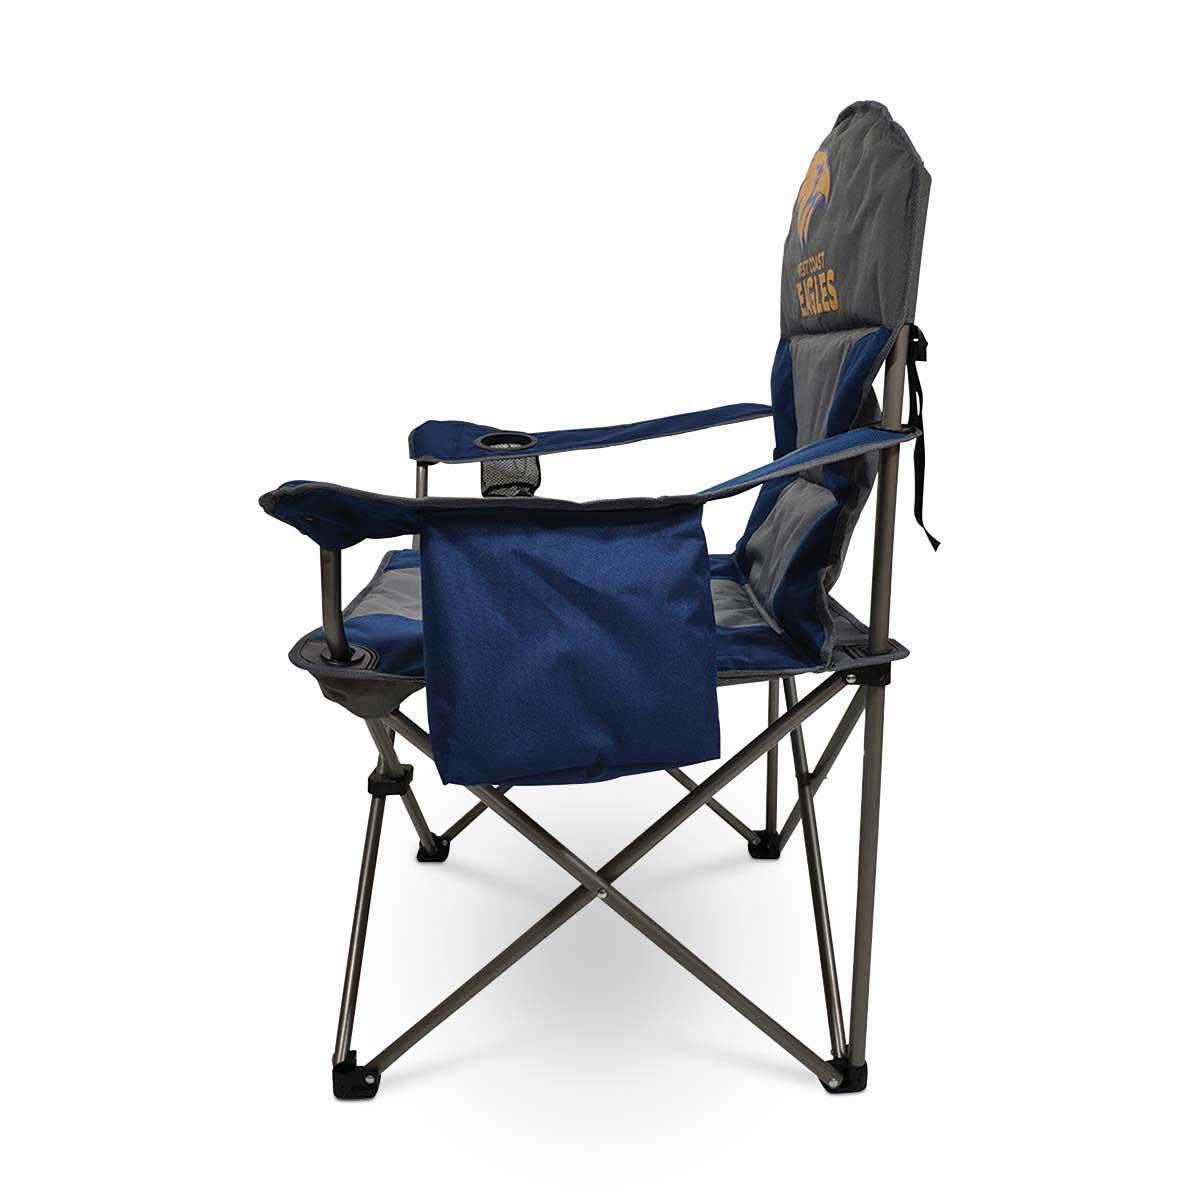 Includes Carry Bag West Coast Eagles AFL Outdoor Camping Chair 